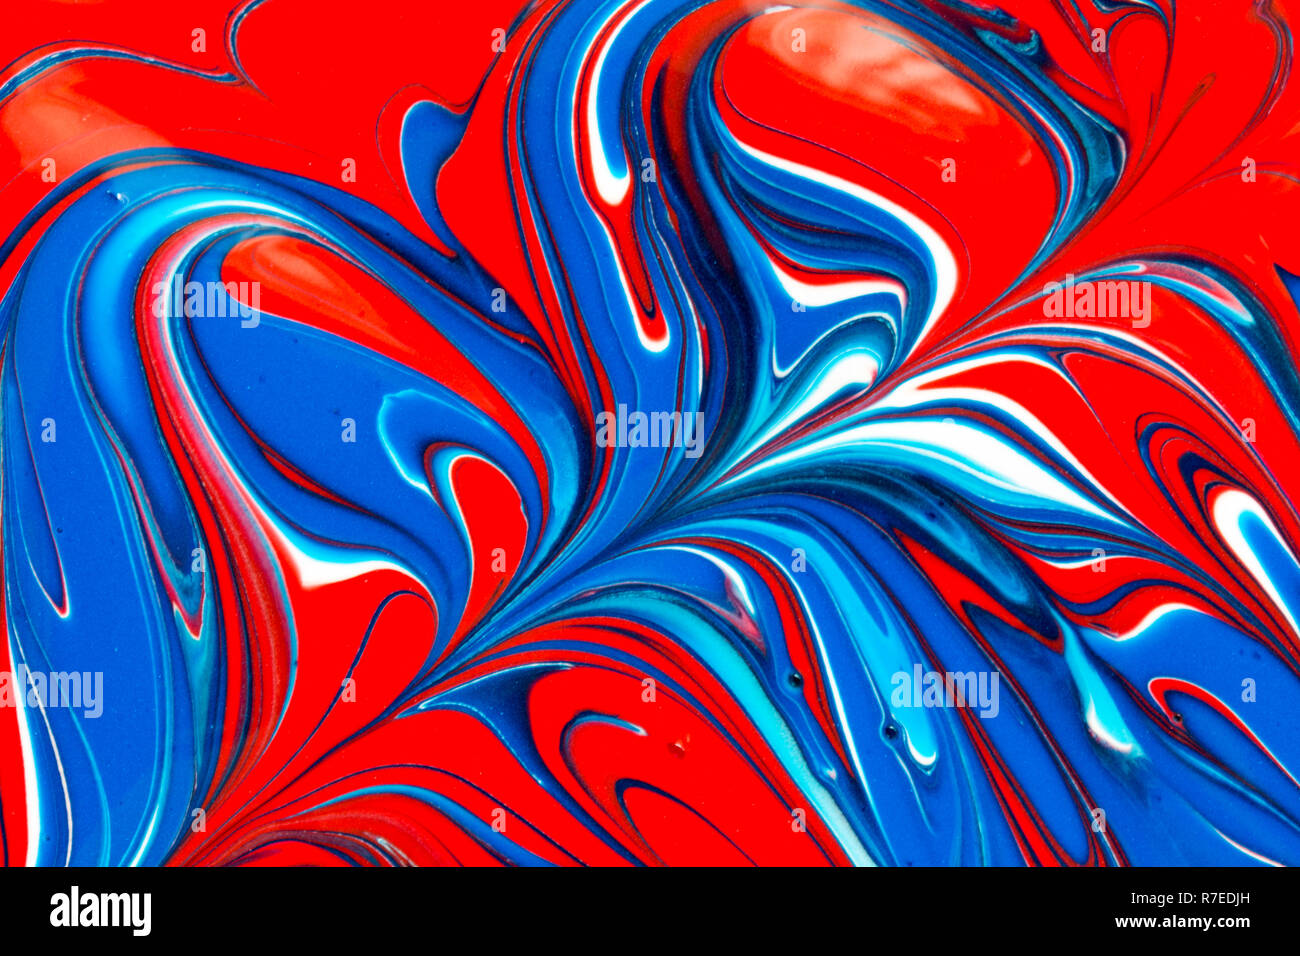 Colourful Abstract Background Of Red White And Blue Liquid Paint Swirls Stock Photo Alamy